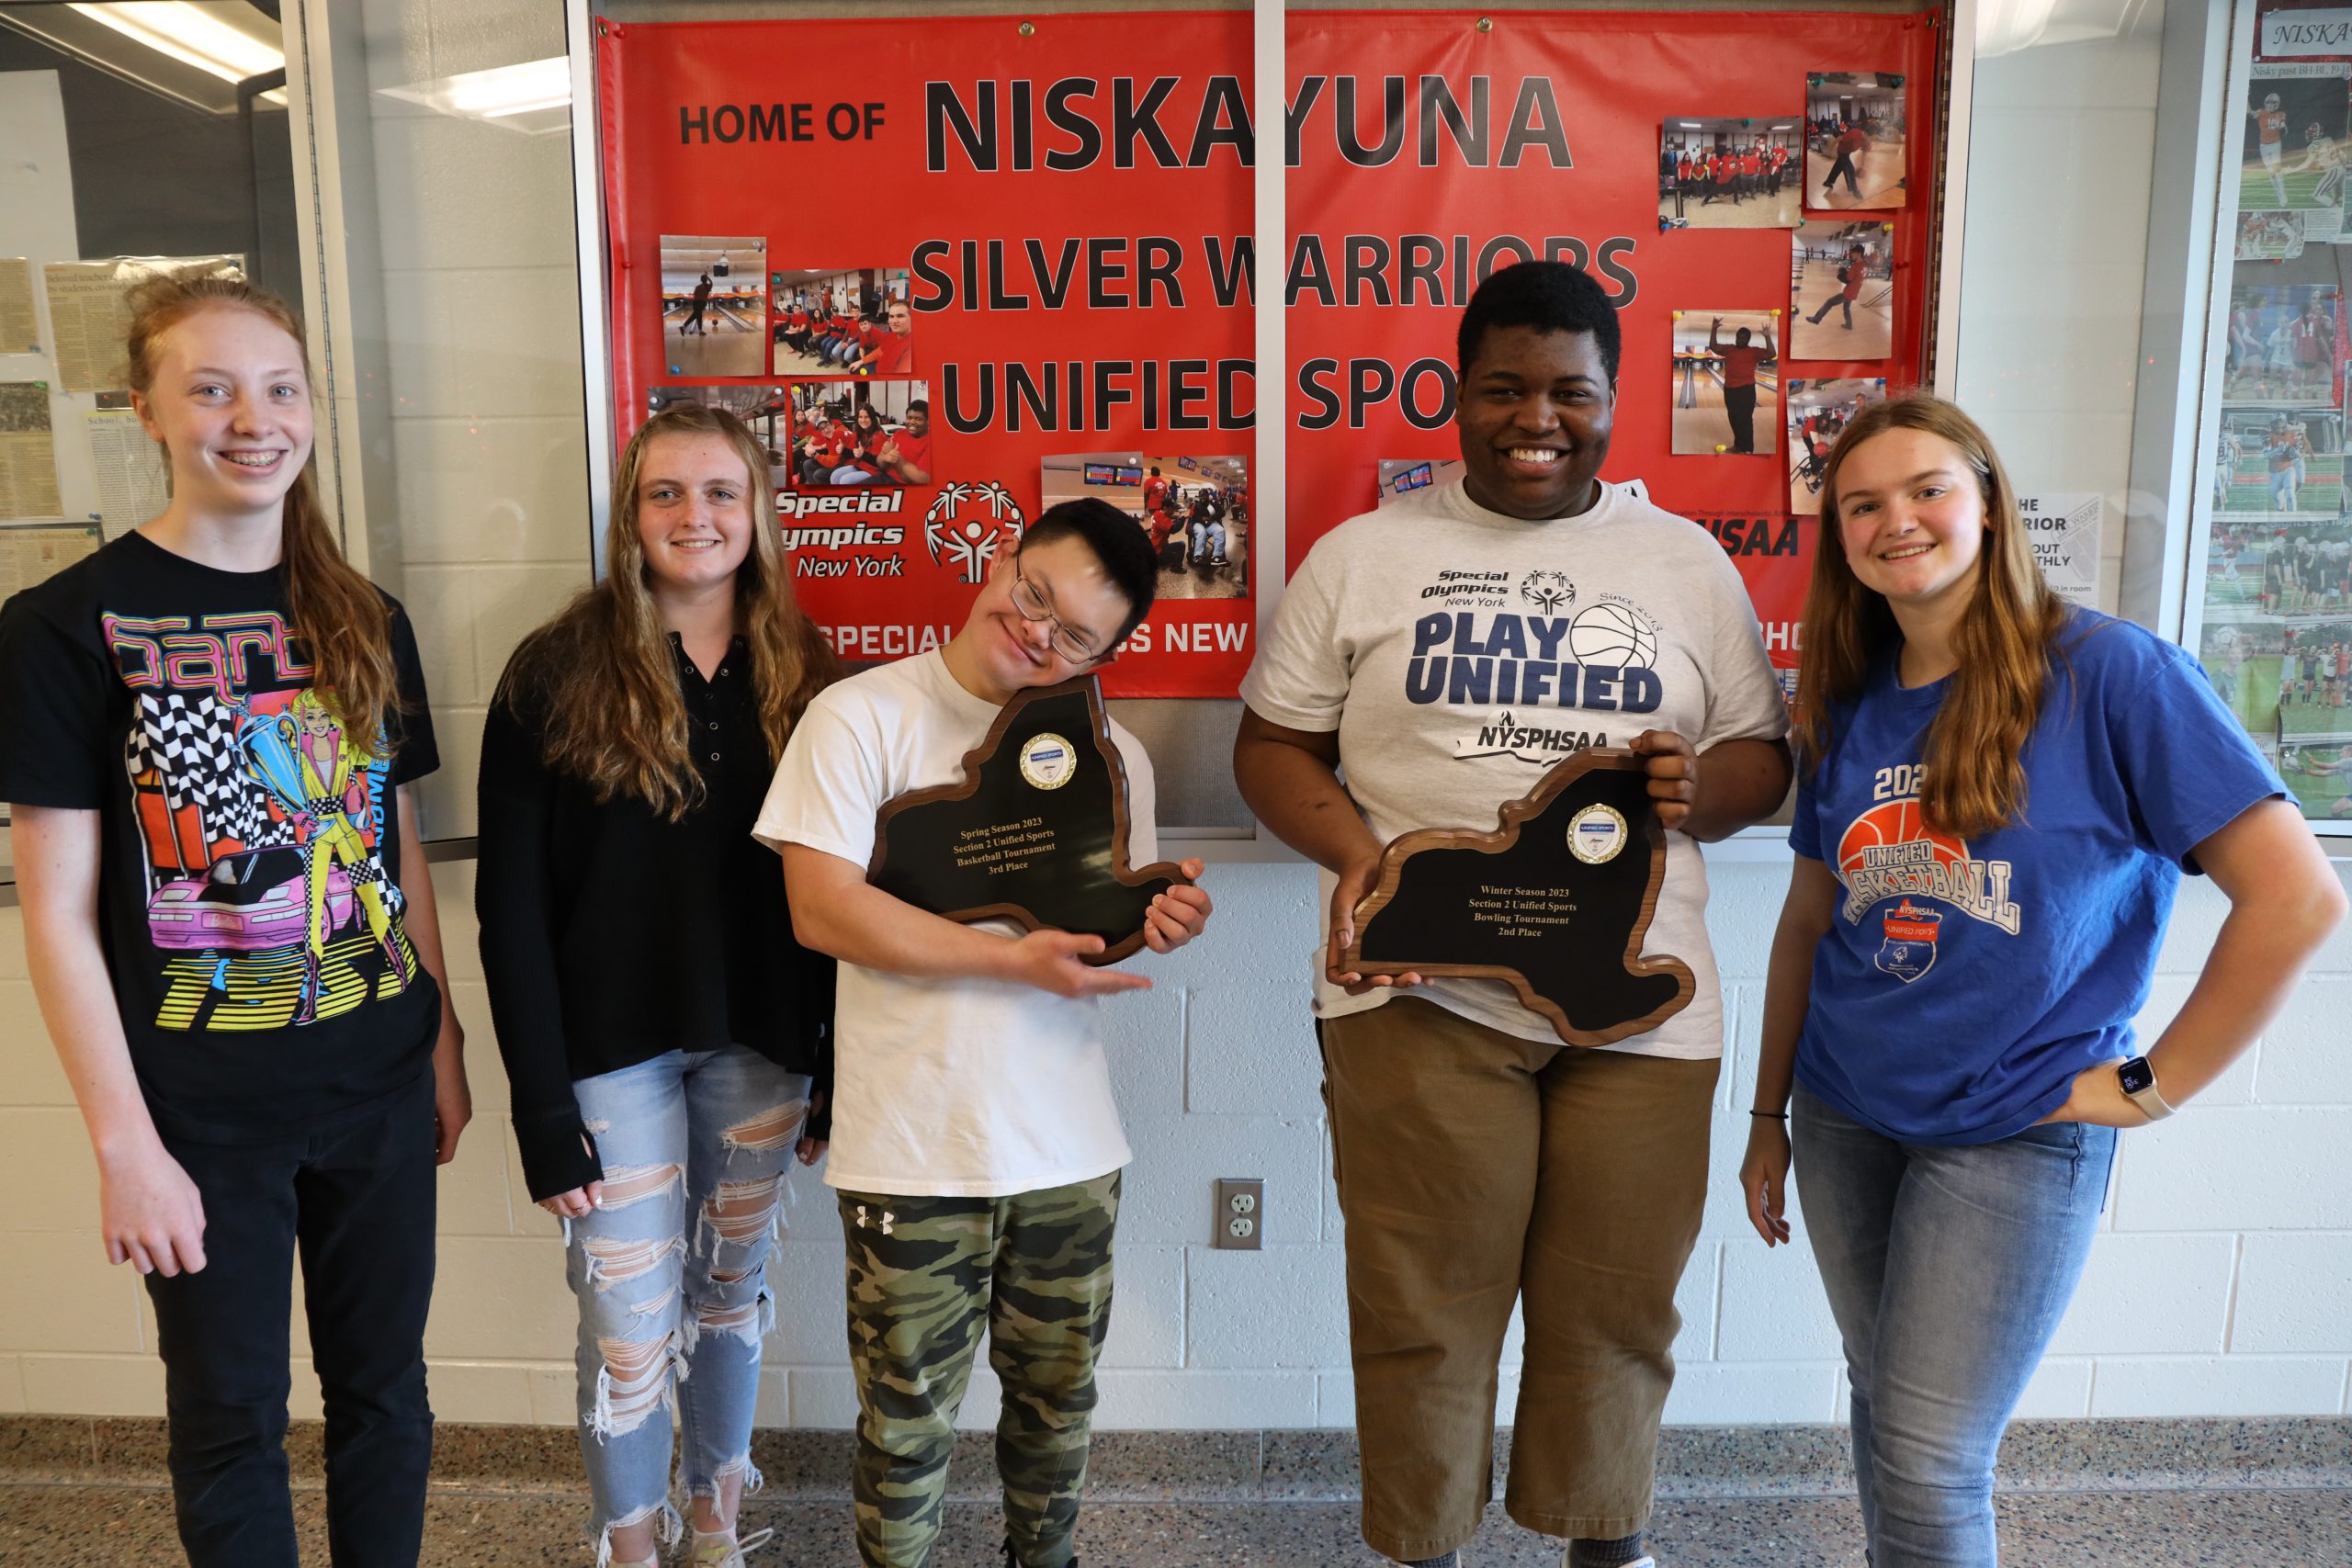 Unified sports teammates pose with plaques.